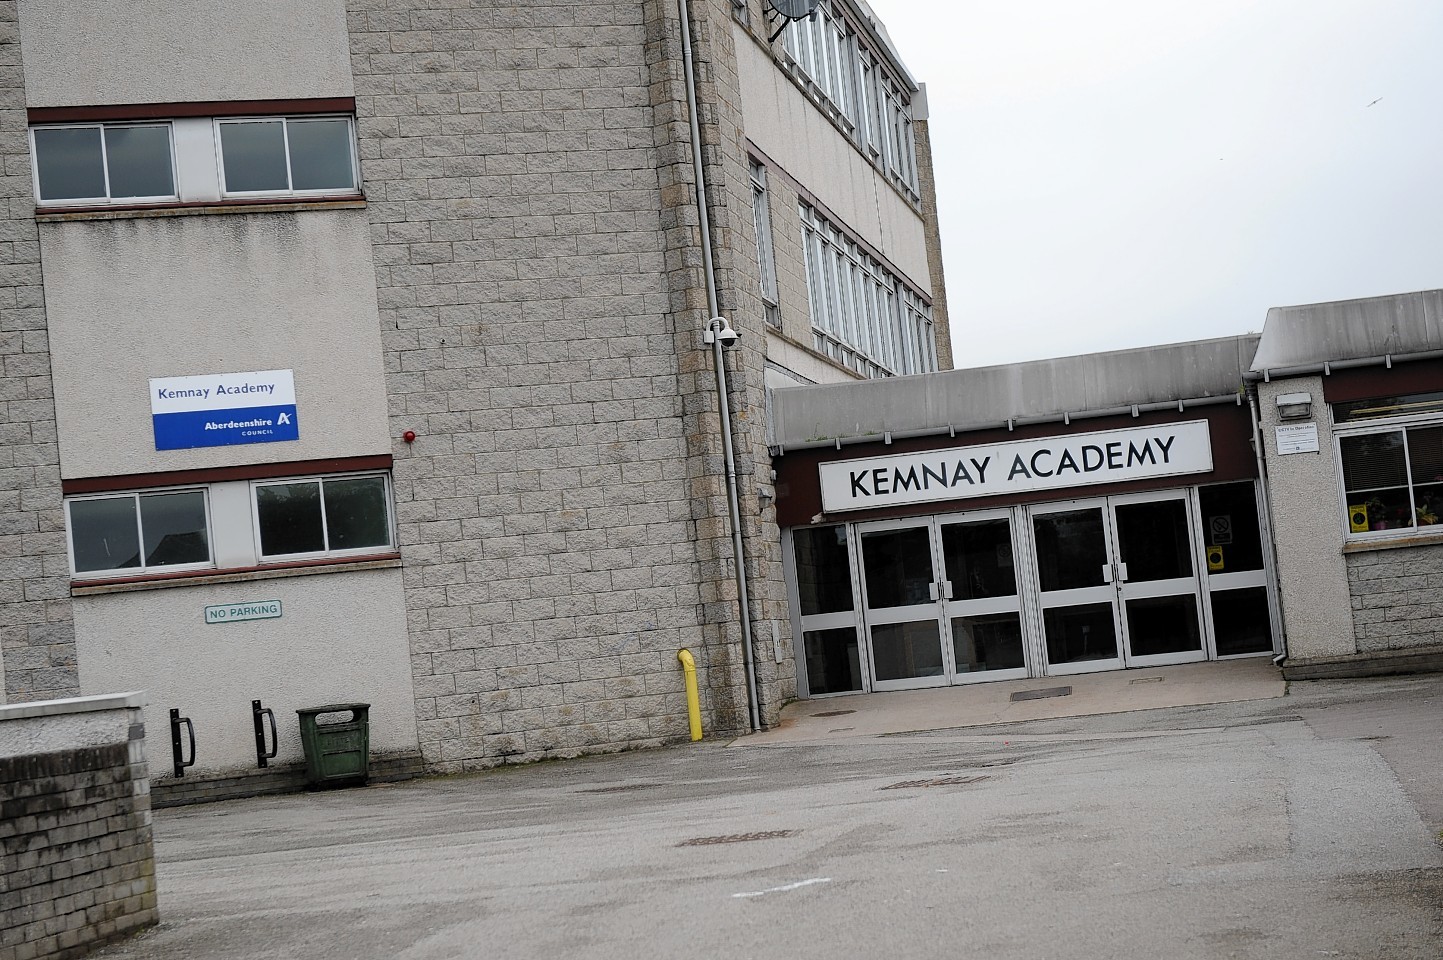 Concerns have been raised by locals that the development could increase pressures on the already over-capacity Kemnay Academy